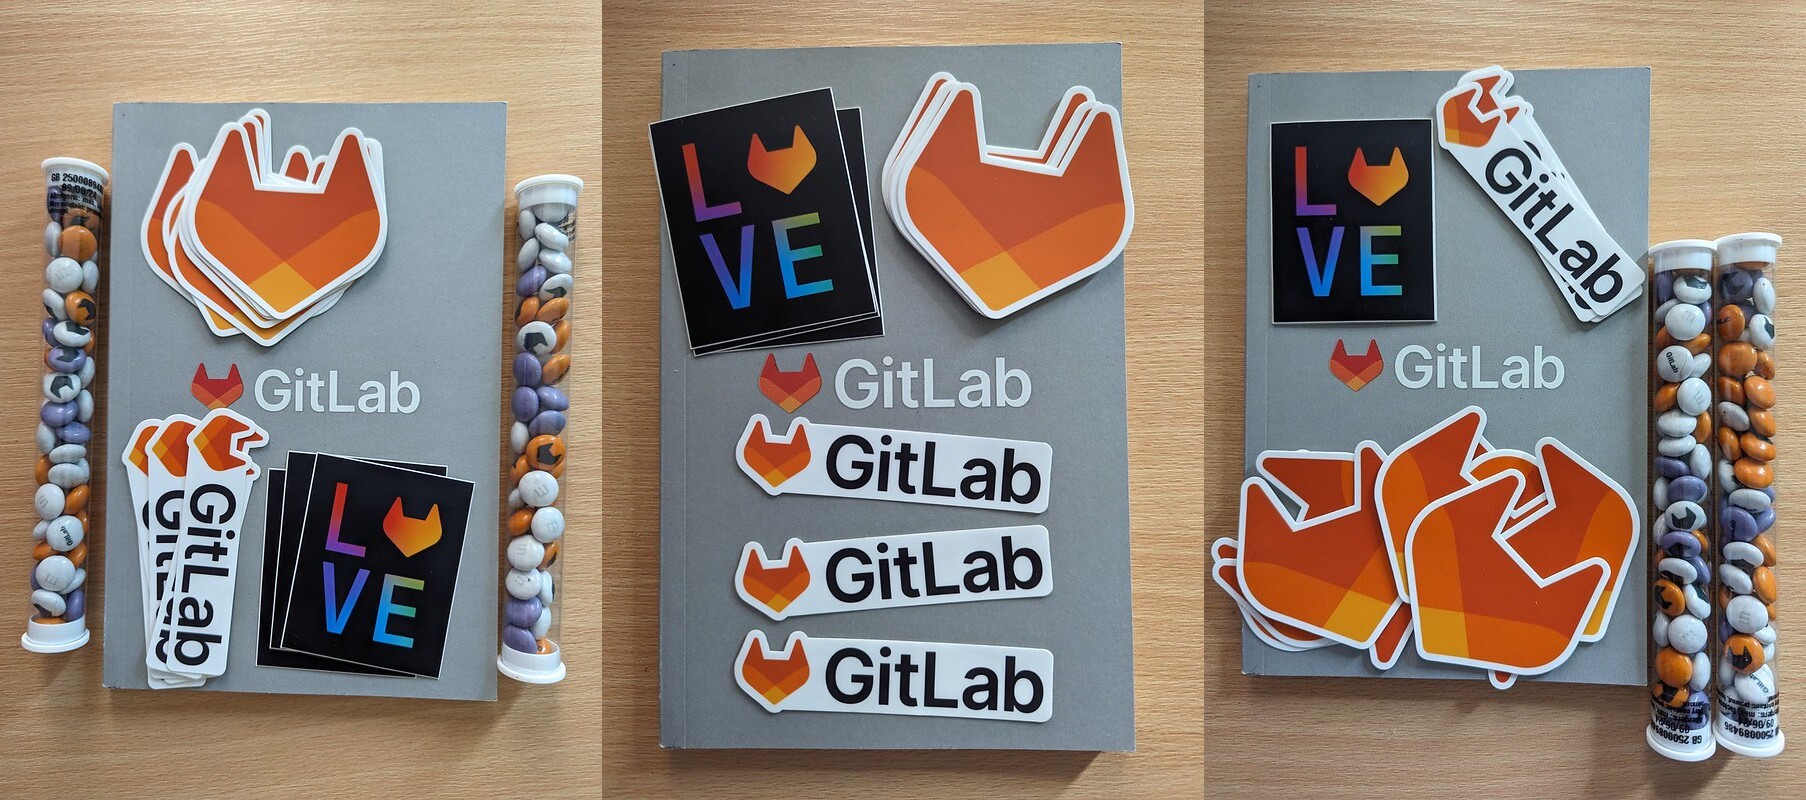 We want your honest frank feedback on Improving Your Future. The most constructive and actionable feedback will receive (in ascending order) GitLab stickers, GitLab branded M&Ms and GitLab noetbooks. The foxy GitLab logo isn’t actually fox but a Japanese raccoon dog or Tanuki, who knew? (Sato 2022) 🦊